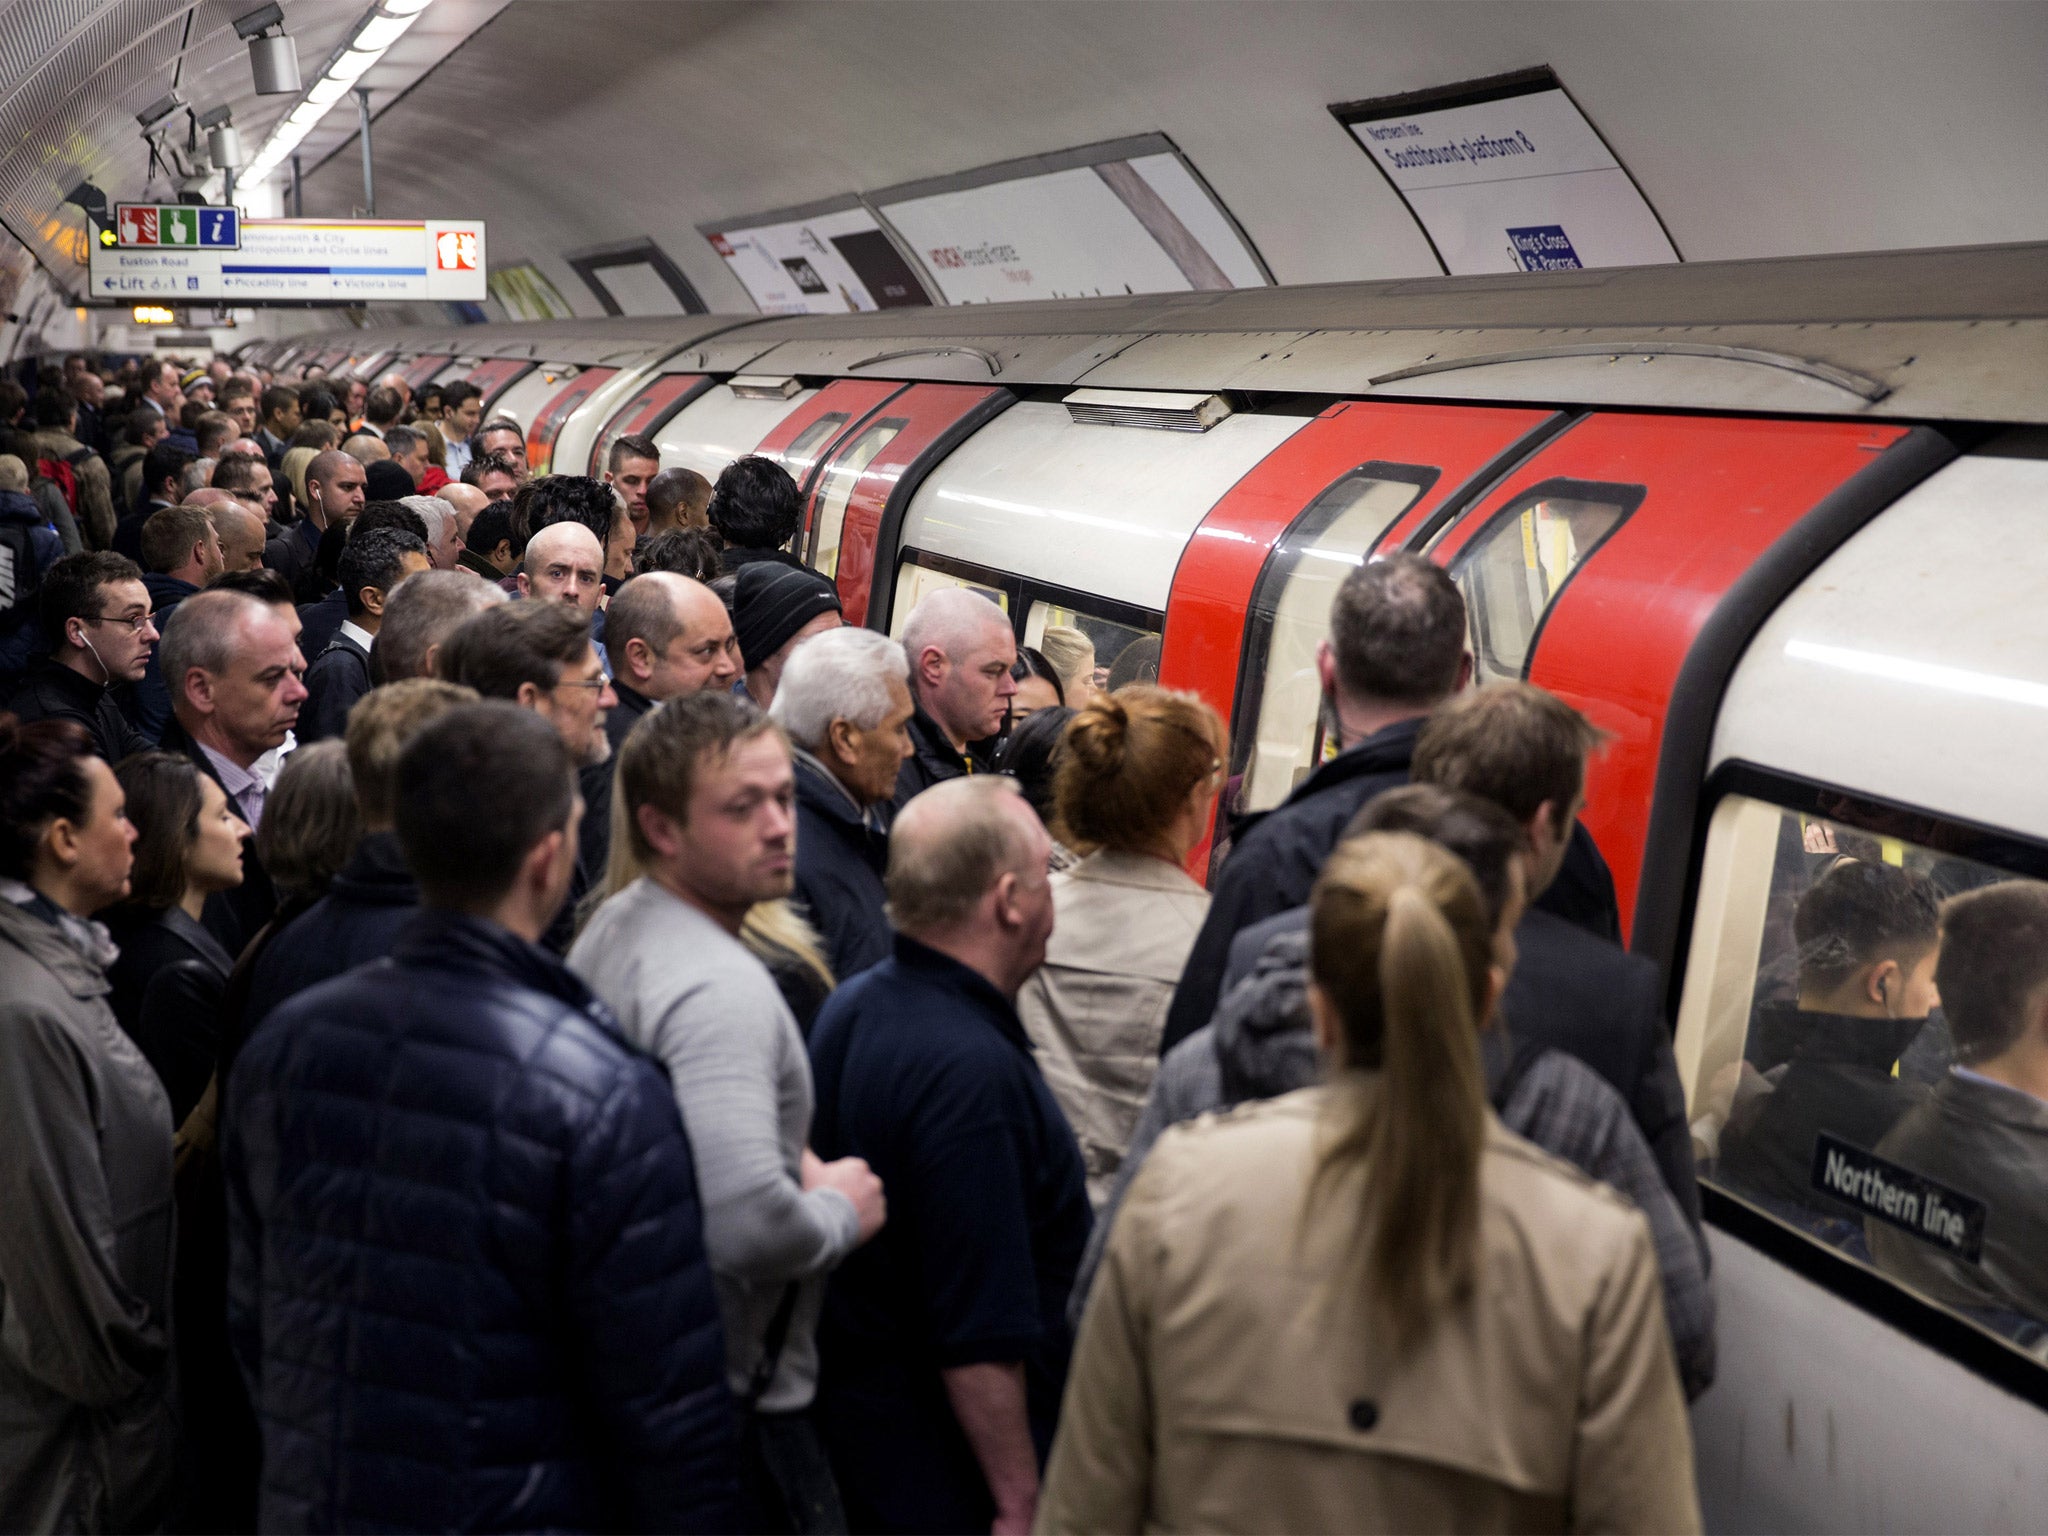 London Underground staff are due to hold a 48 hour strike next week